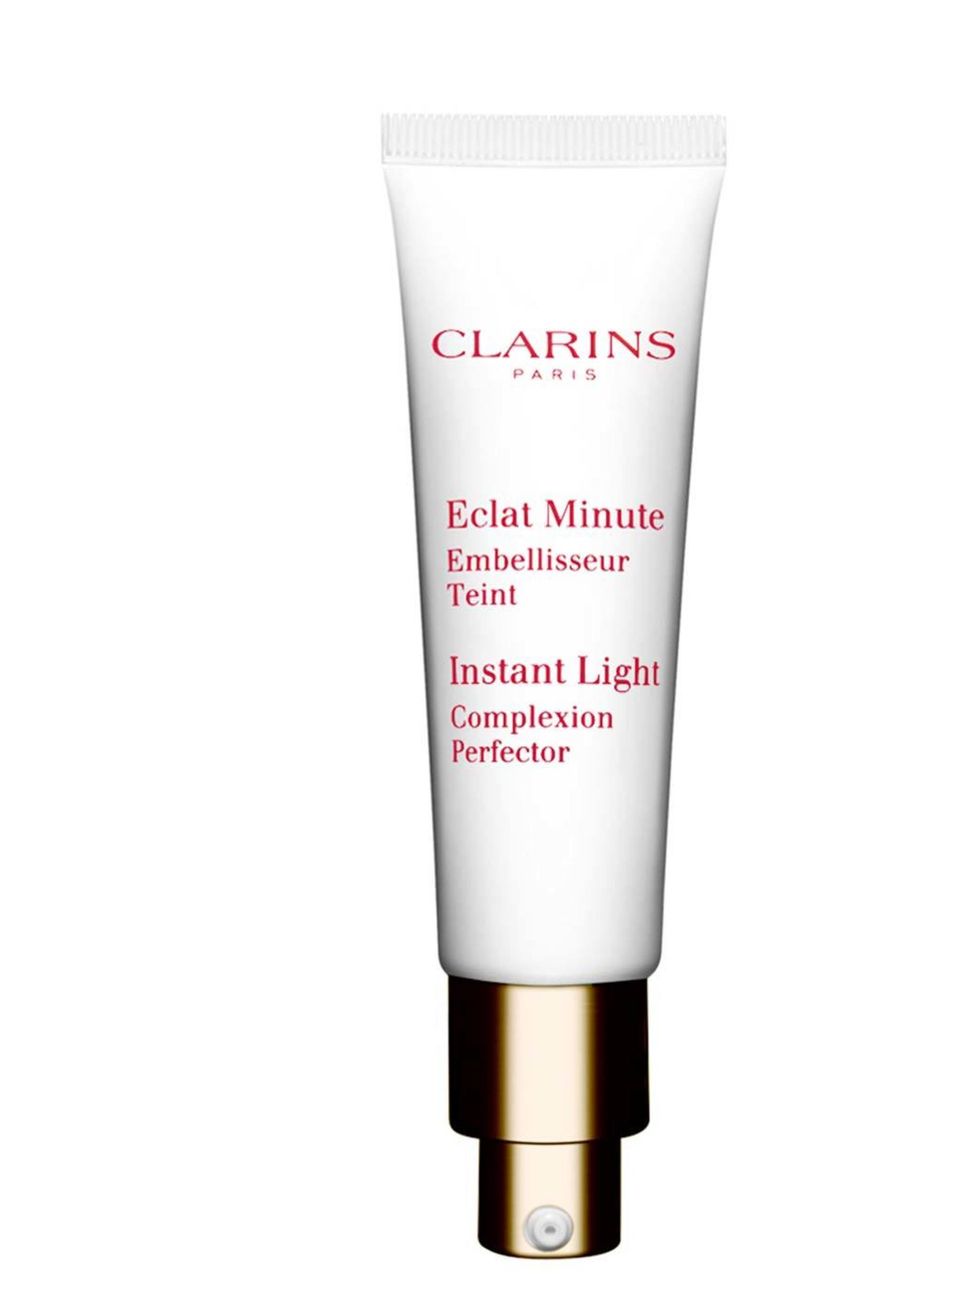 <p>Clarins <a href="http://www.clarins.co.uk/Instant-Light-Complexion-Perfector/C050105003,en_GB,pd.html?dwvar_C050105003_color=00%20rose%20shimmer&start=3">Instant Light Complexion Perfector</a>, £26</p><p>Not only does this disguise imperfections and ev